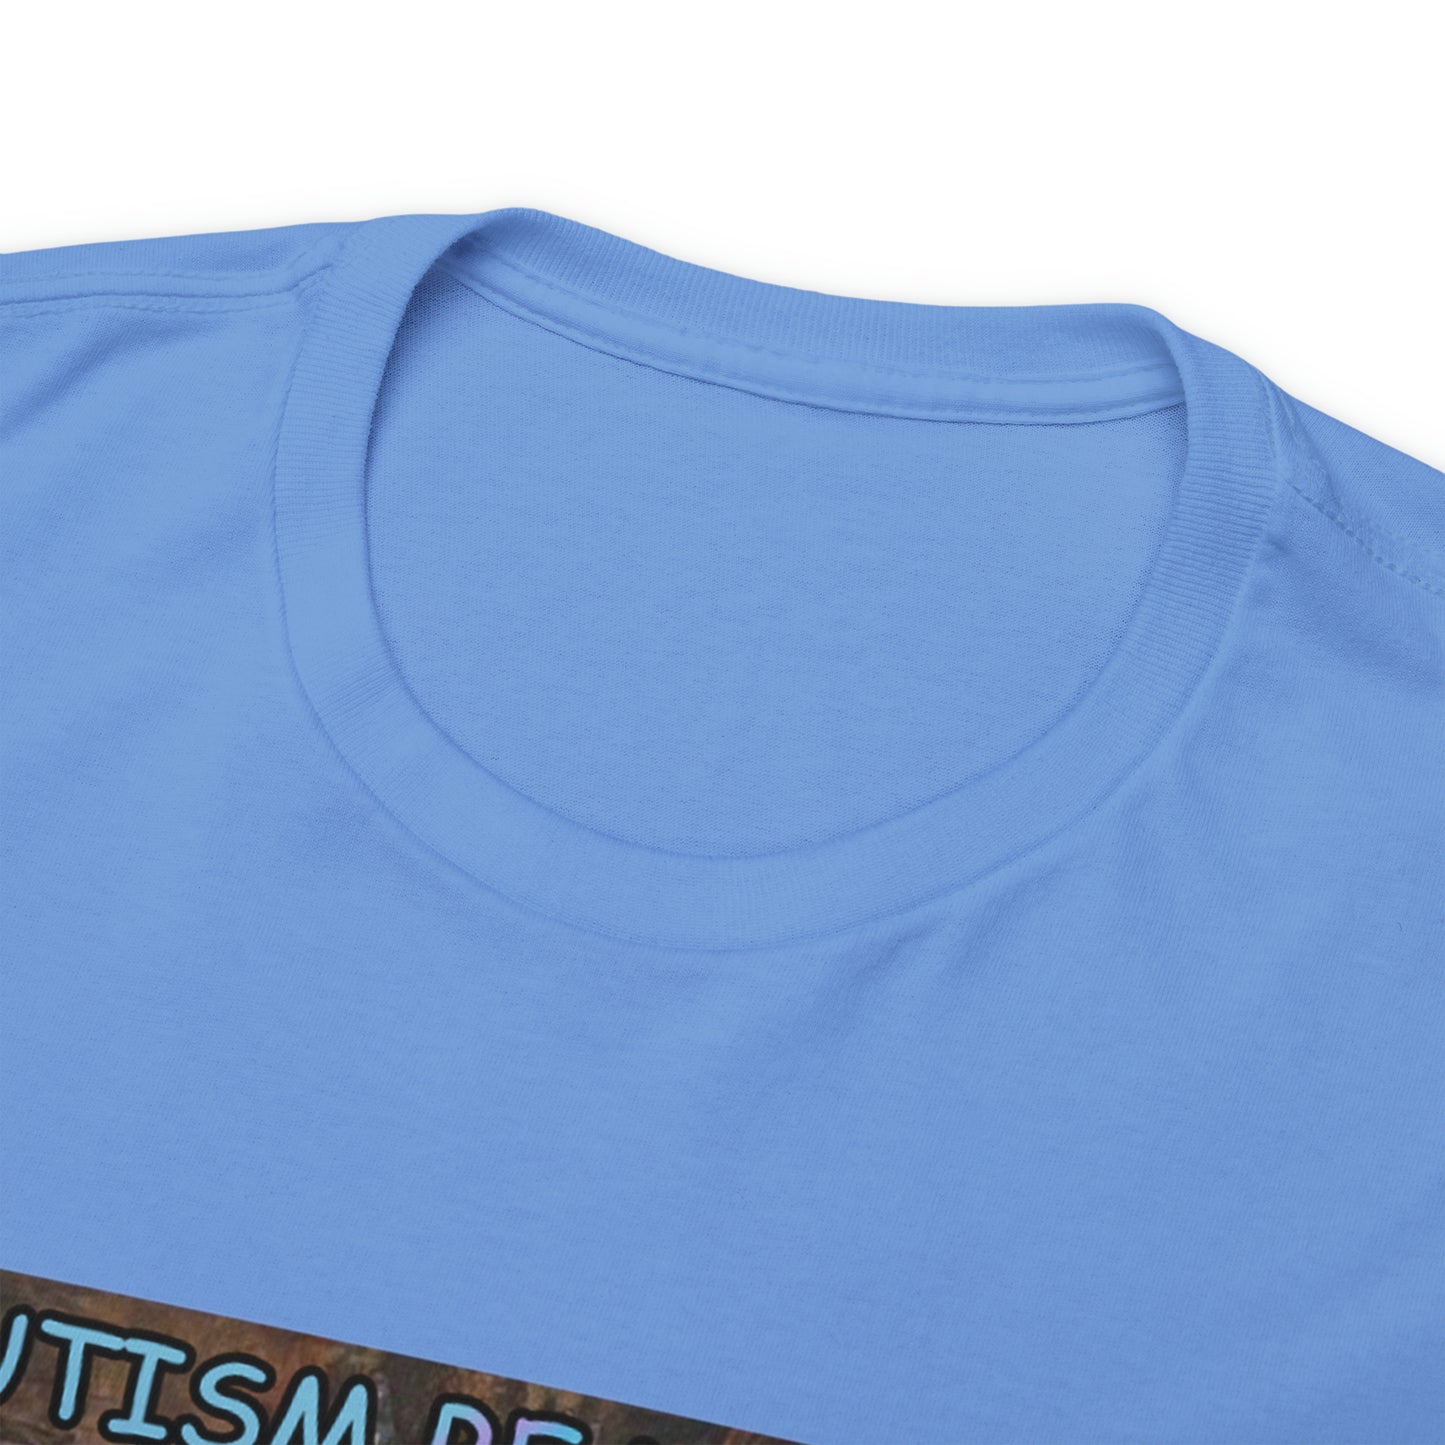 Autism be dammed tee